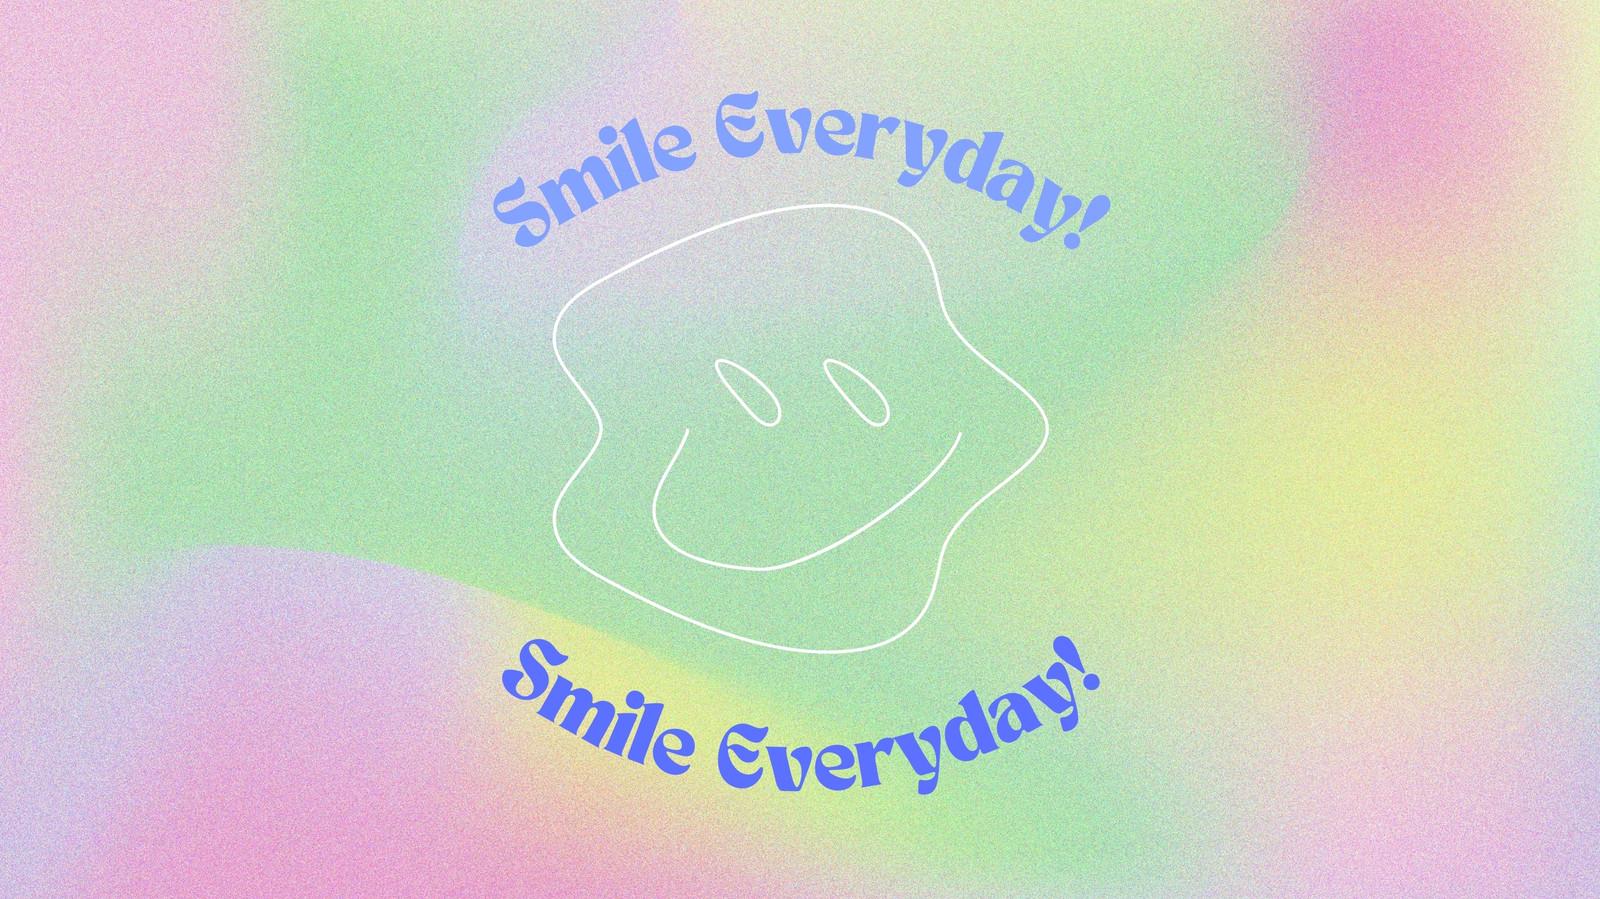 Share 91 aesthetic smiley face wallpaper tumblr latest  incdgdbentre